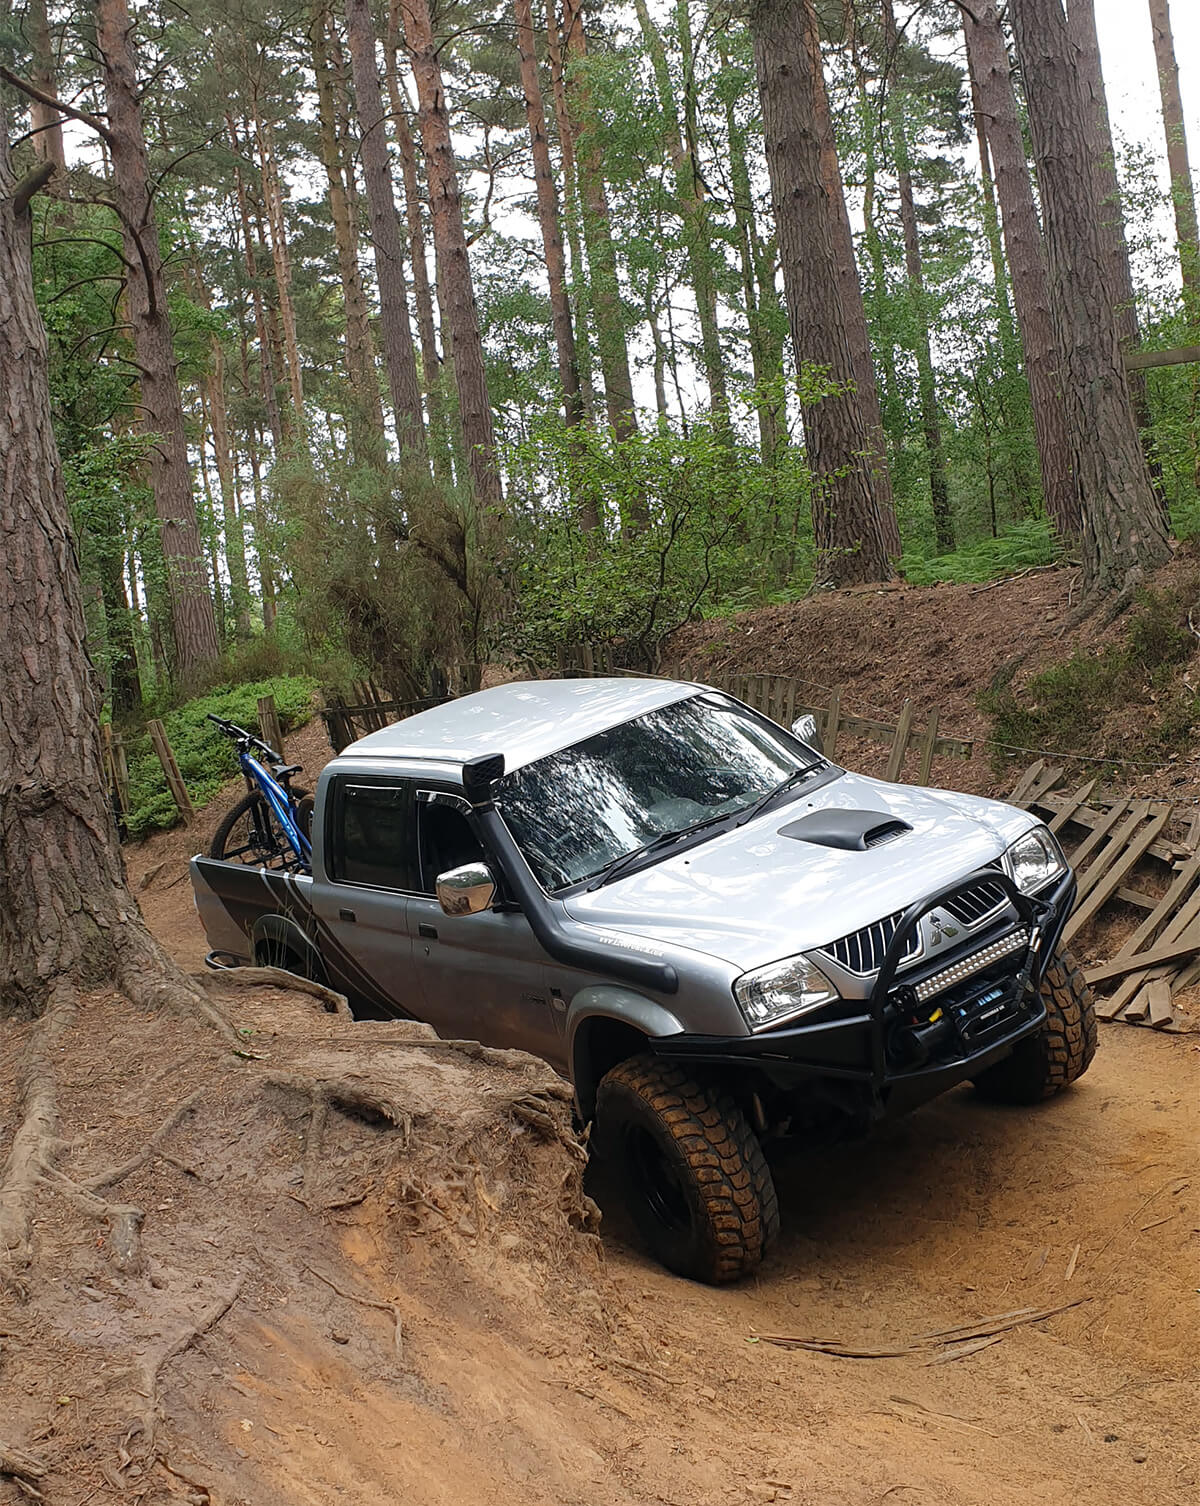 2005 Mitsubishi L200 off-roading and overlandng